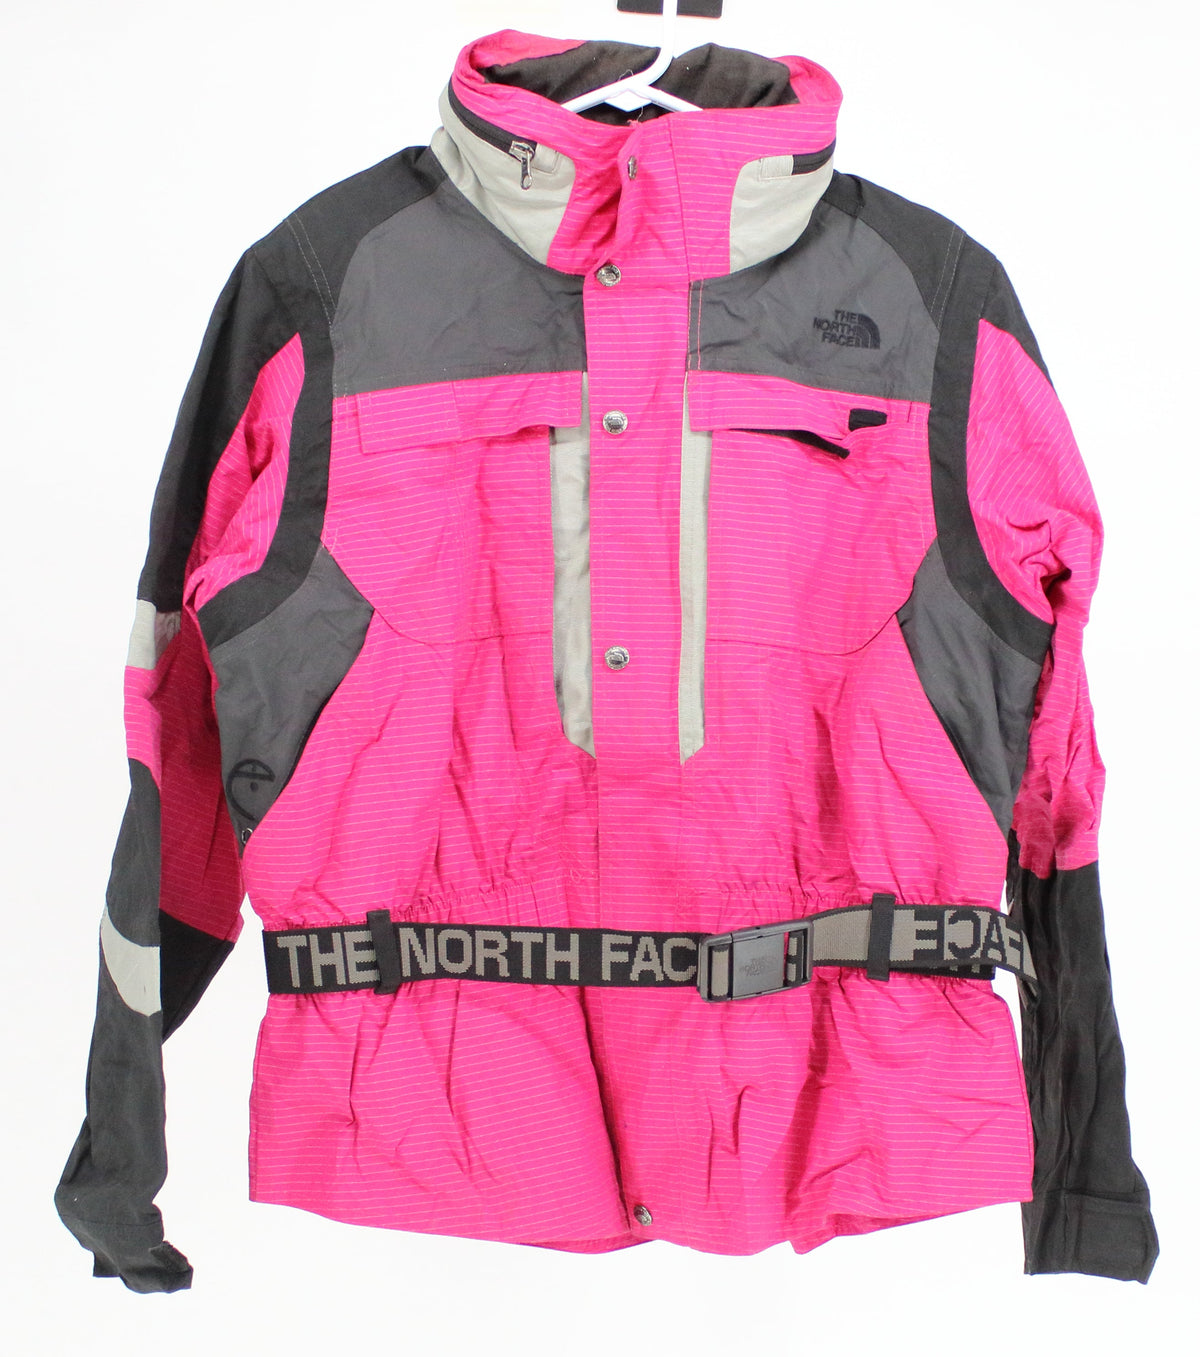 The North Face Pink And Black Women's Ski Jacket